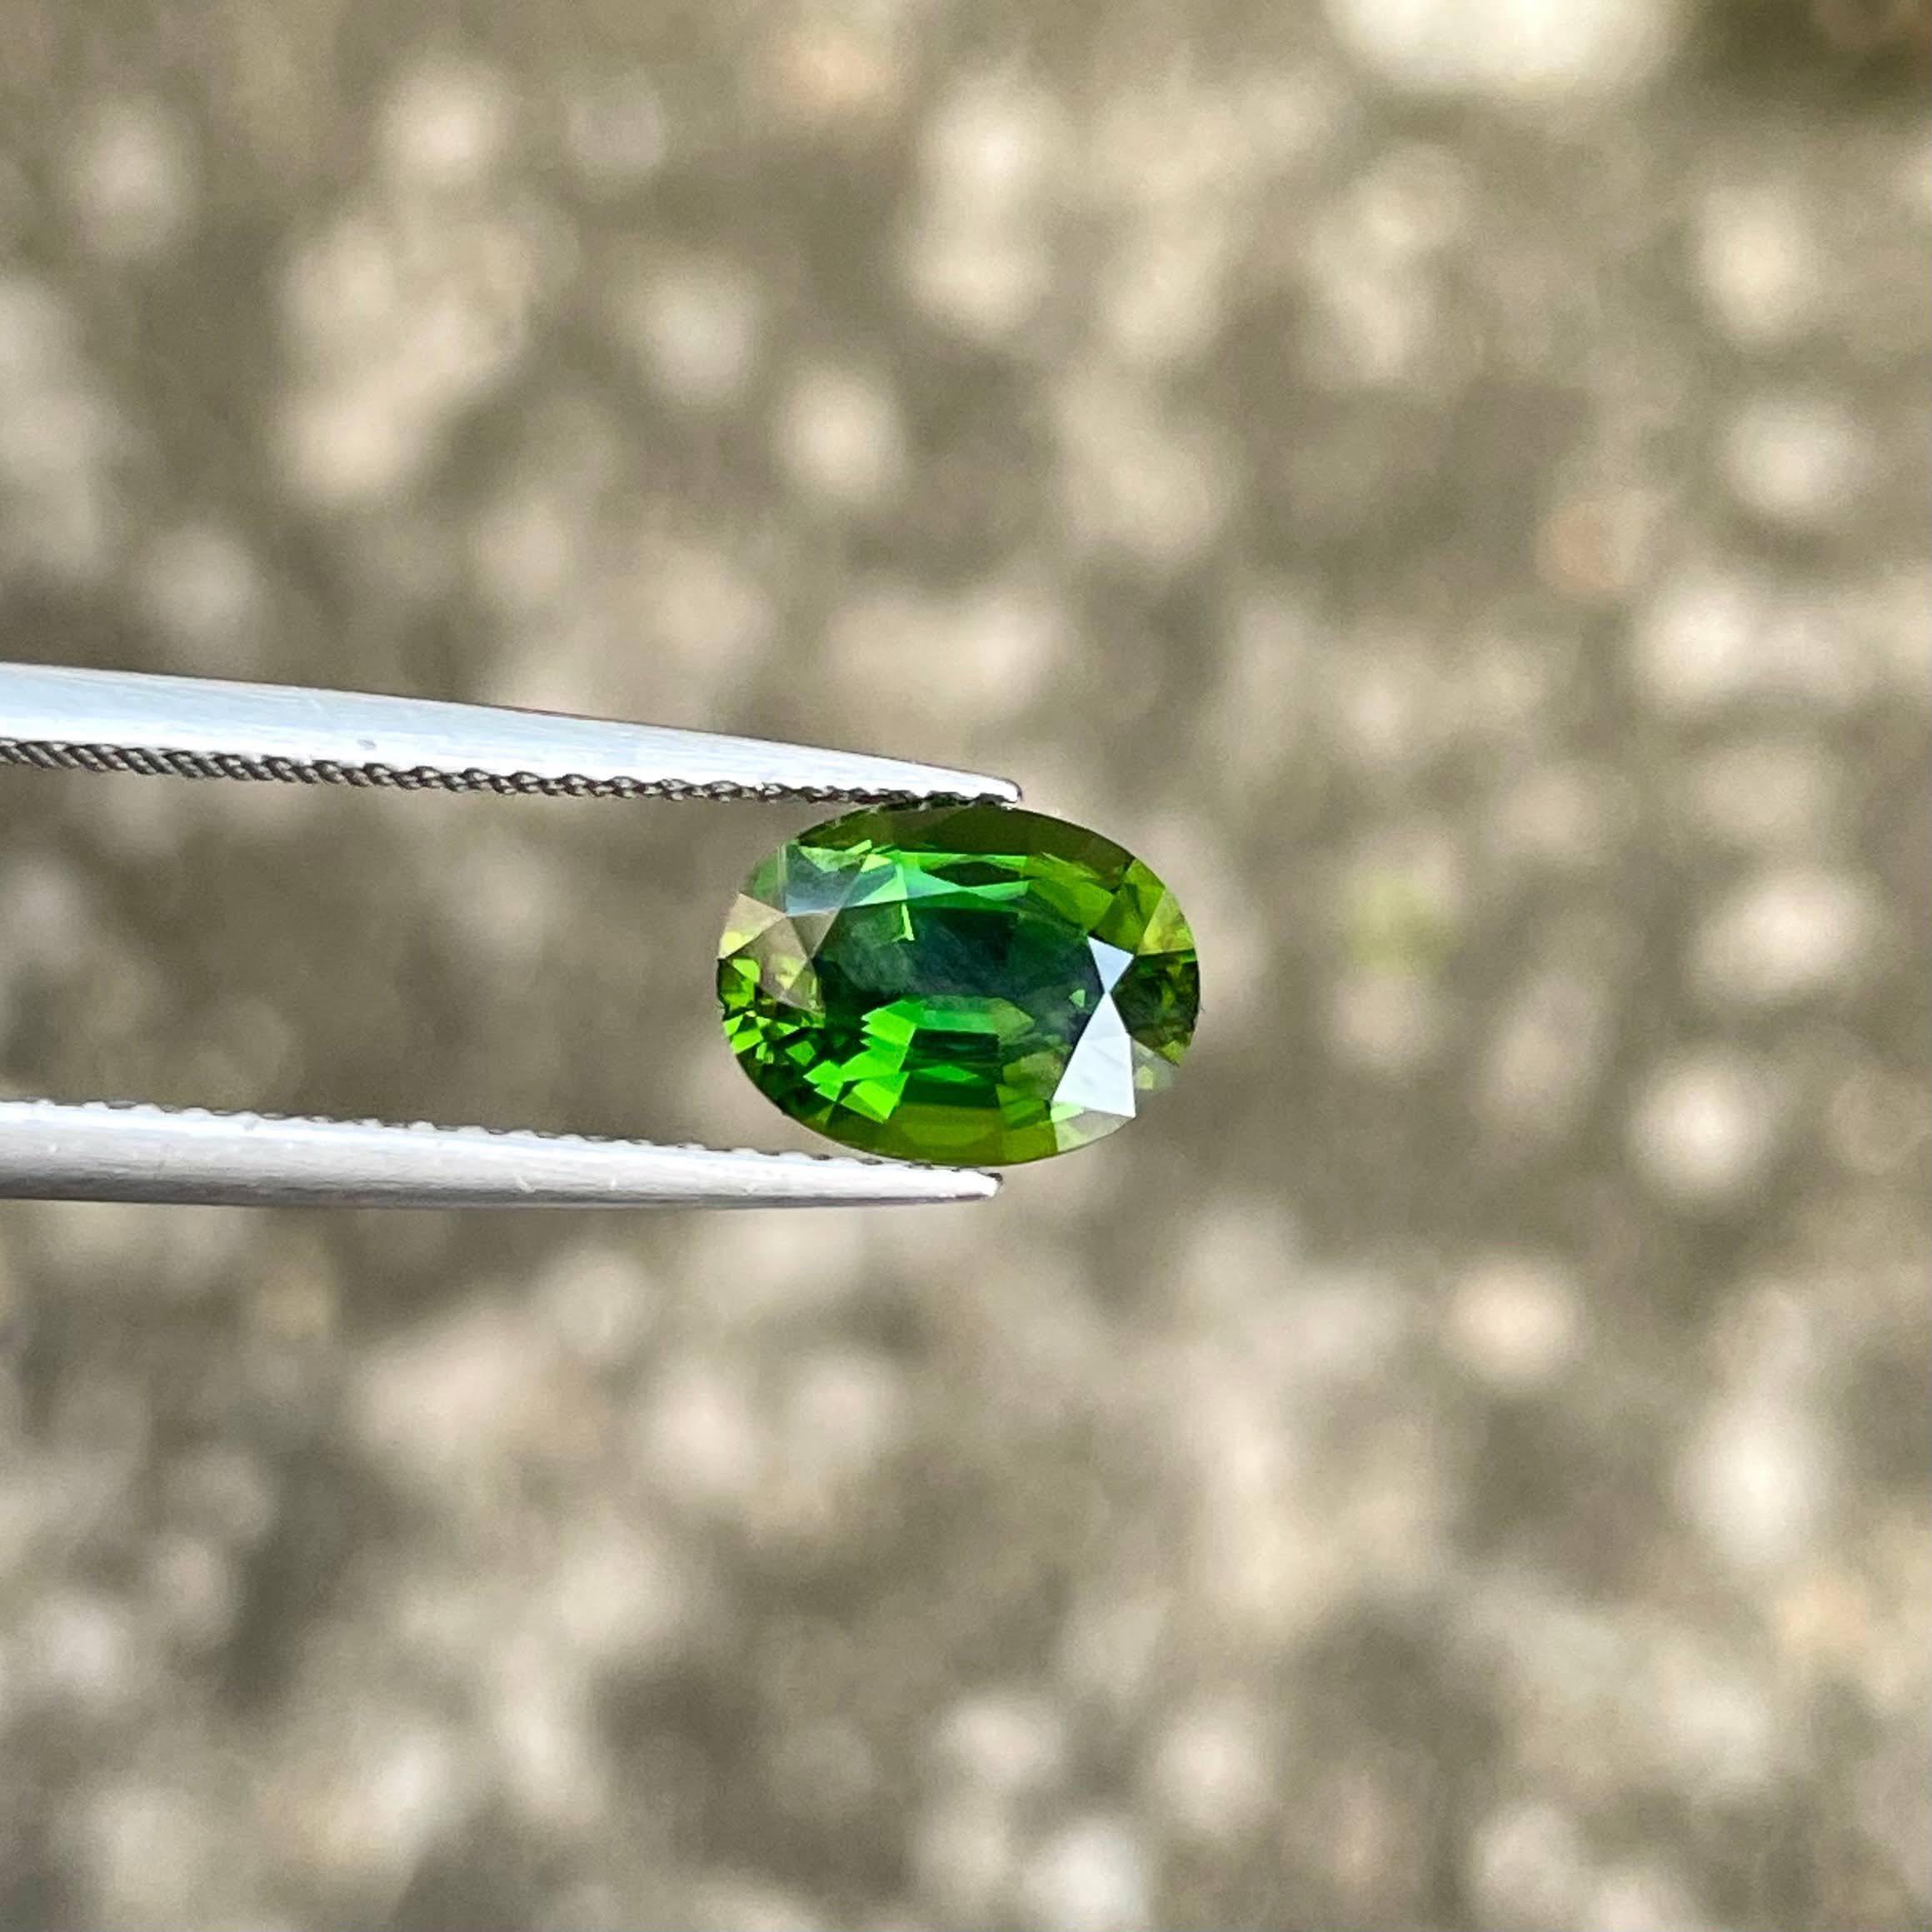 Weight 1.45 carats
Dimensions 8.35x6.35x4.35 mm
Treatment None
Clarity Eye Clean
Origin Tanzania
Shape Oval
Cut Step Oval




The Bright Green Chrome Tourmaline is a captivating gemstone that exudes natural beauty. With a weight of 1.45 carats, this